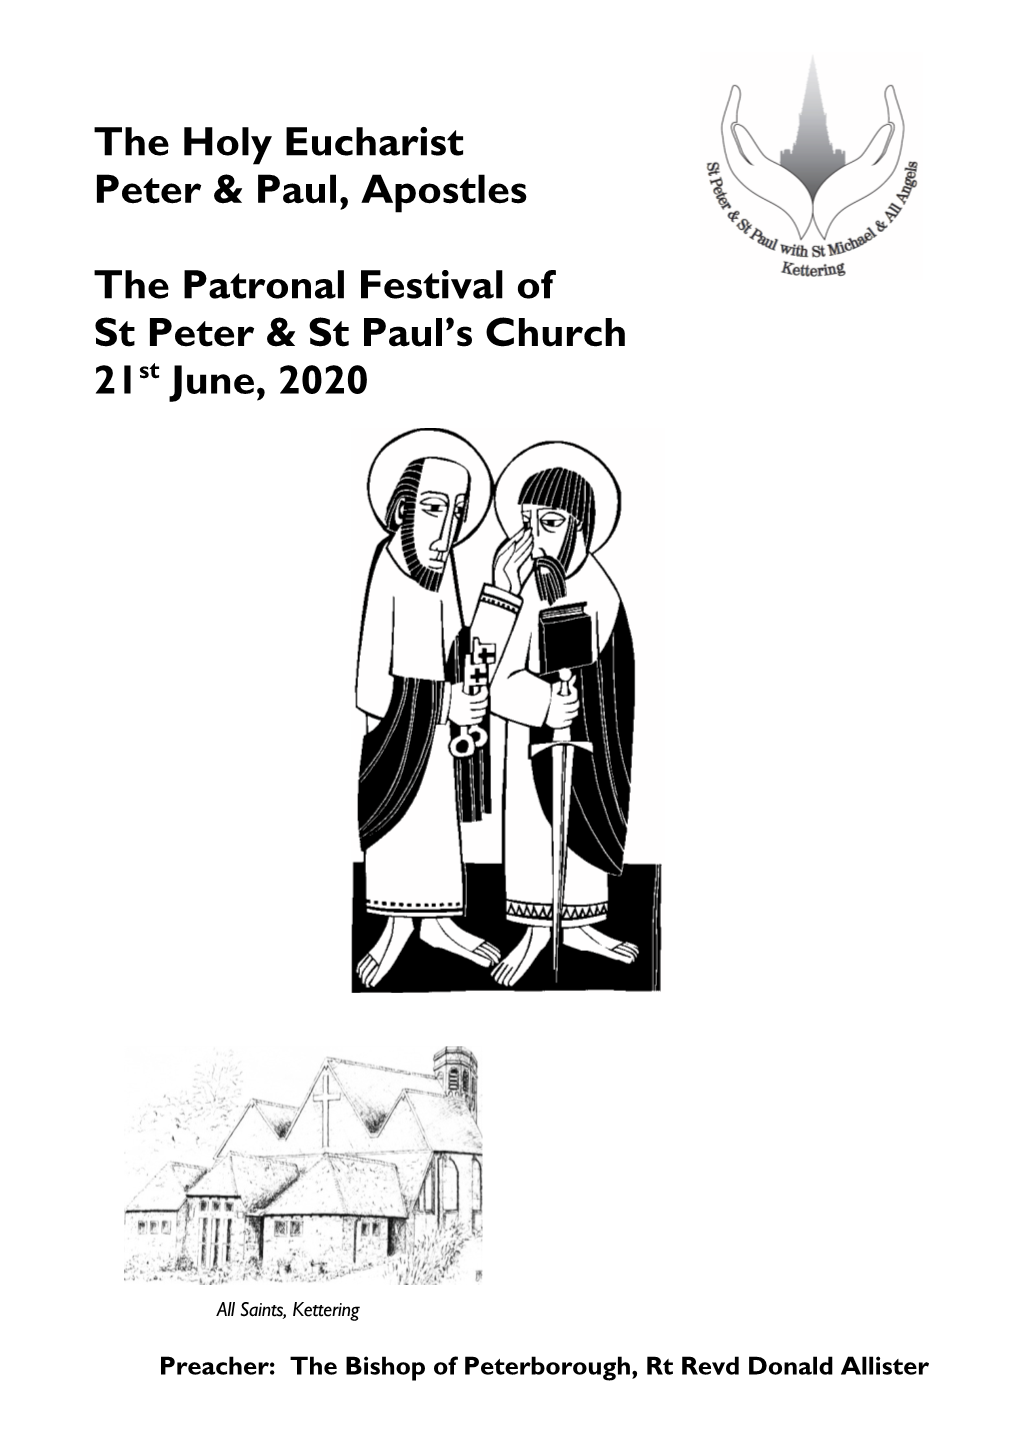 The Holy Eucharist Peter & Paul, Apostles the Patronal Festival of St